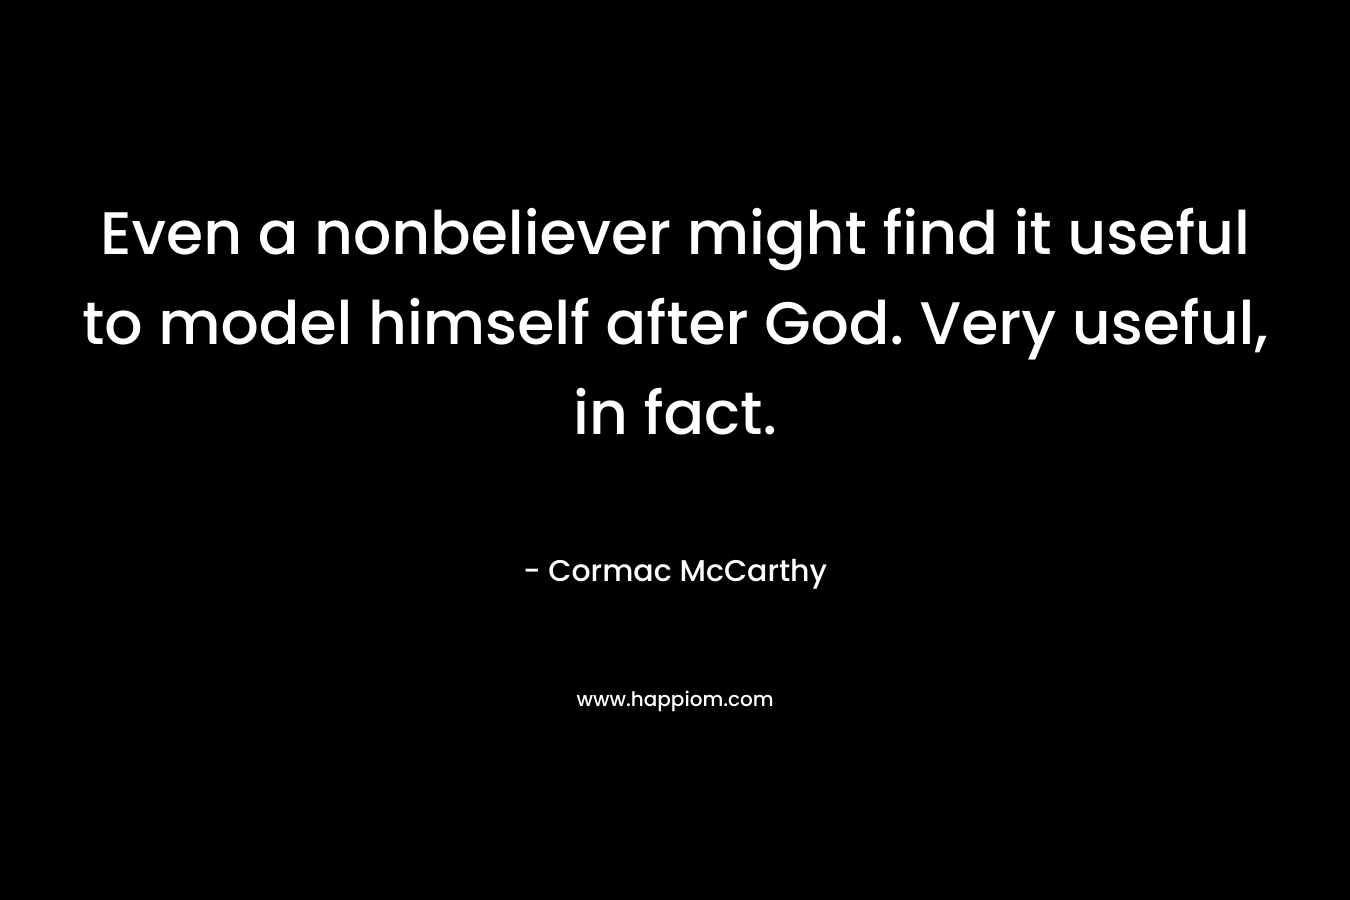 Even a nonbeliever might find it useful to model himself after God. Very useful, in fact.